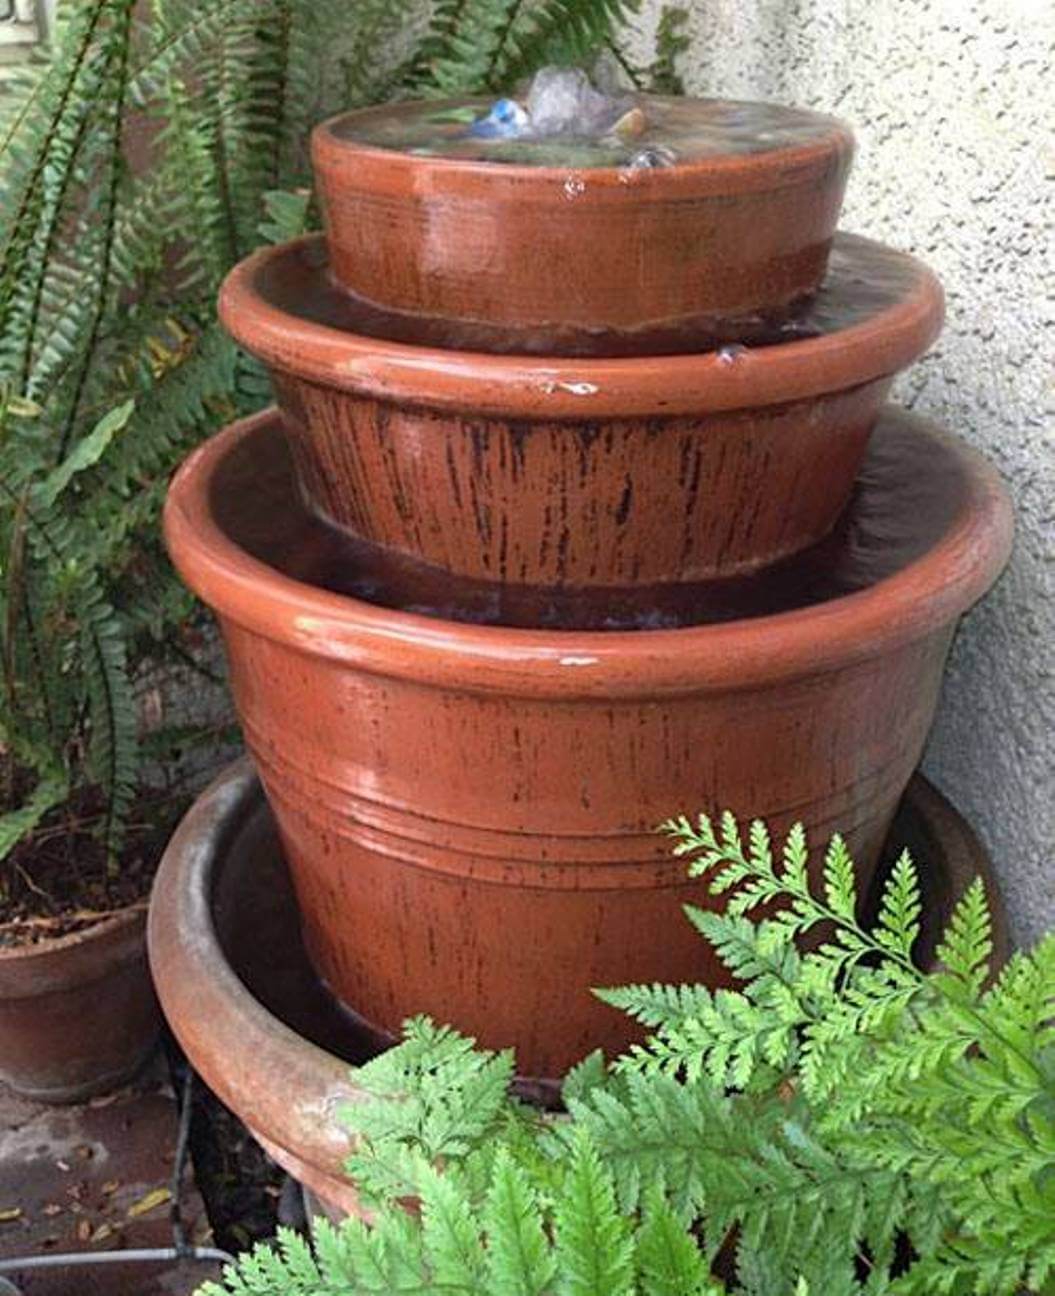 15 Wonderful DIY Water Feature Ideas For Your Spring Garden